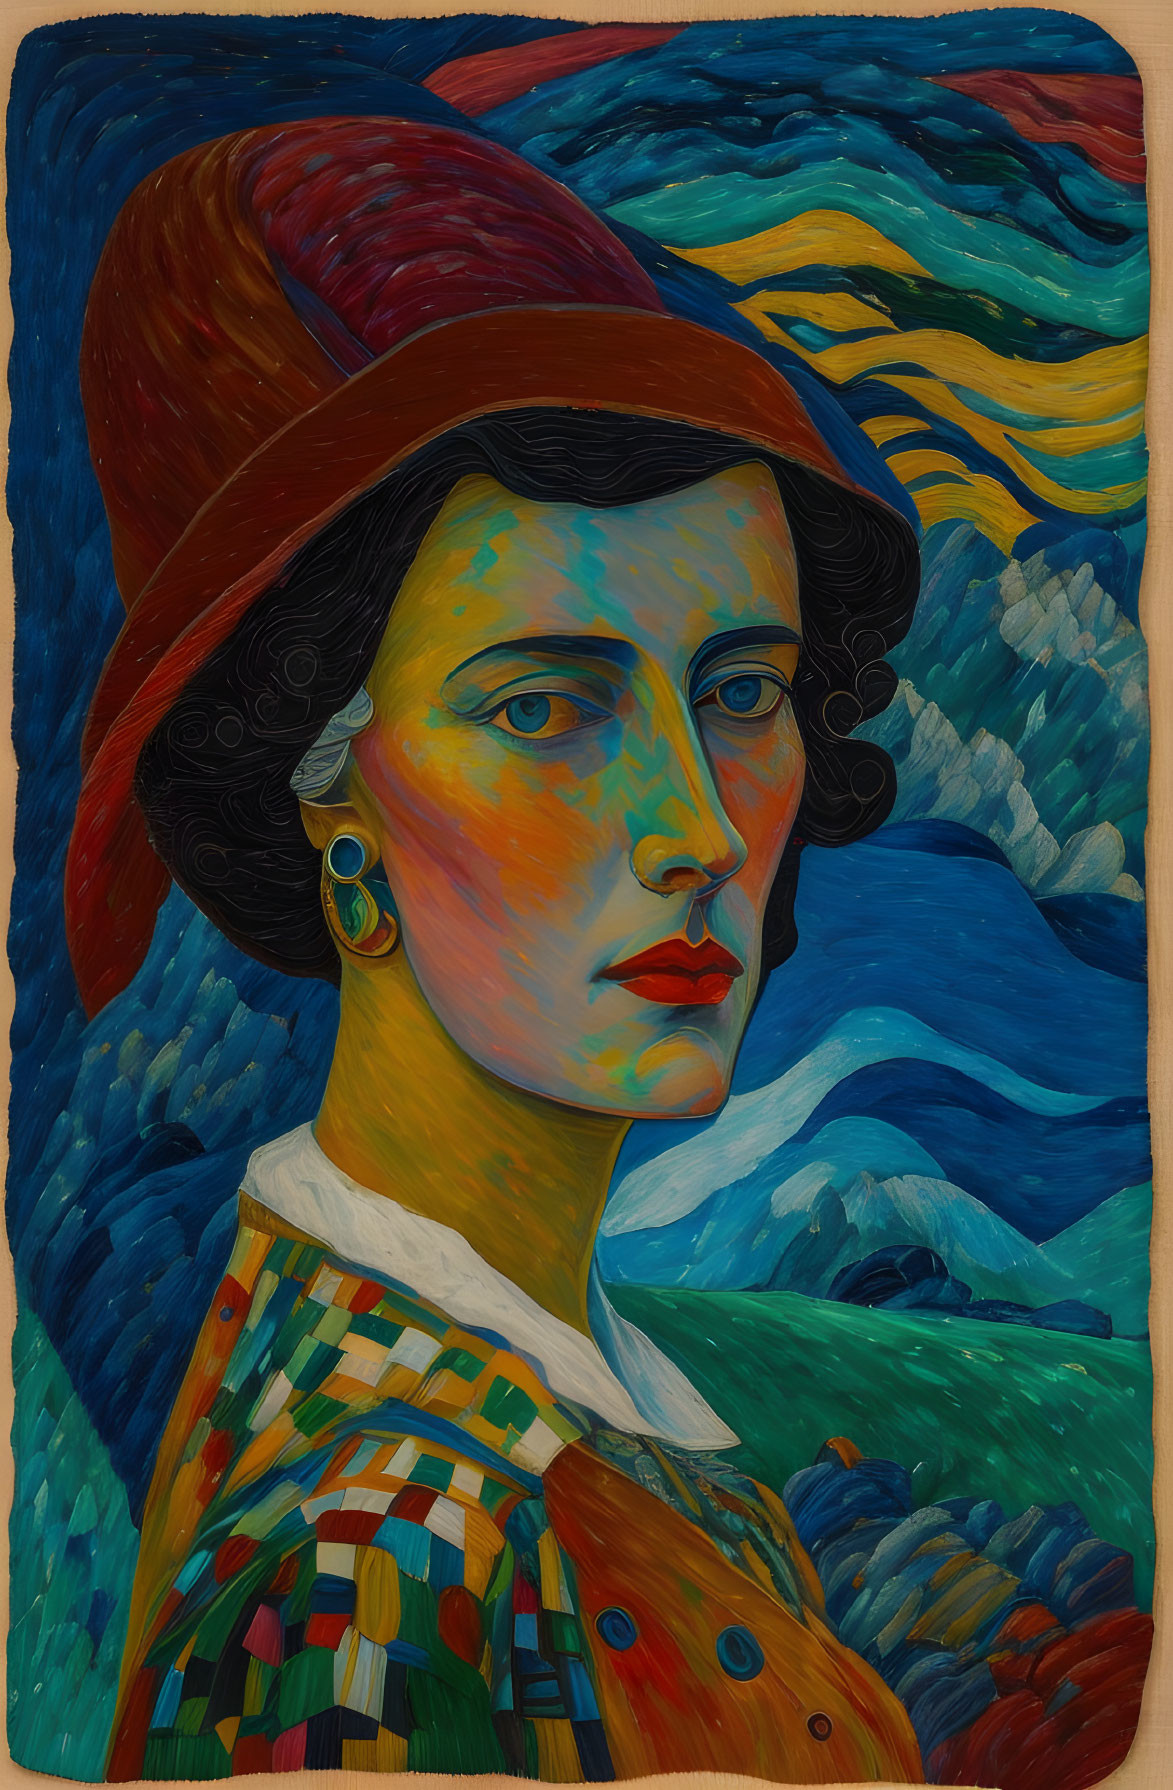 Woman with Red Cheeks and Red Hat in Colorful Blouse Against Blue Swirl Background